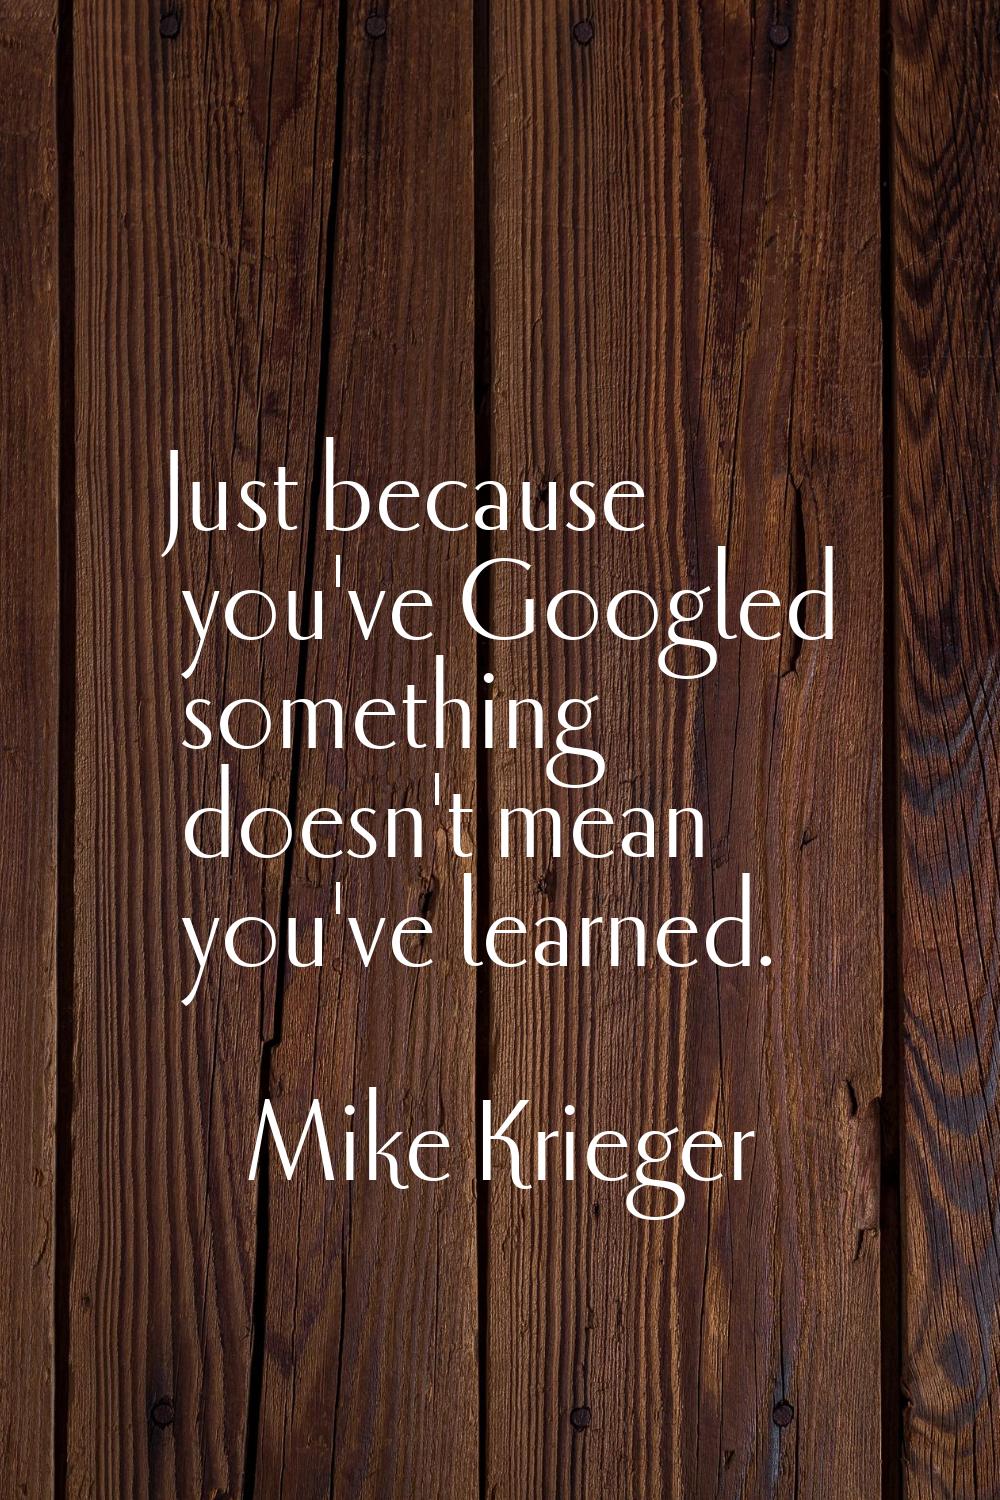 Just because you've Googled something doesn't mean you've learned.